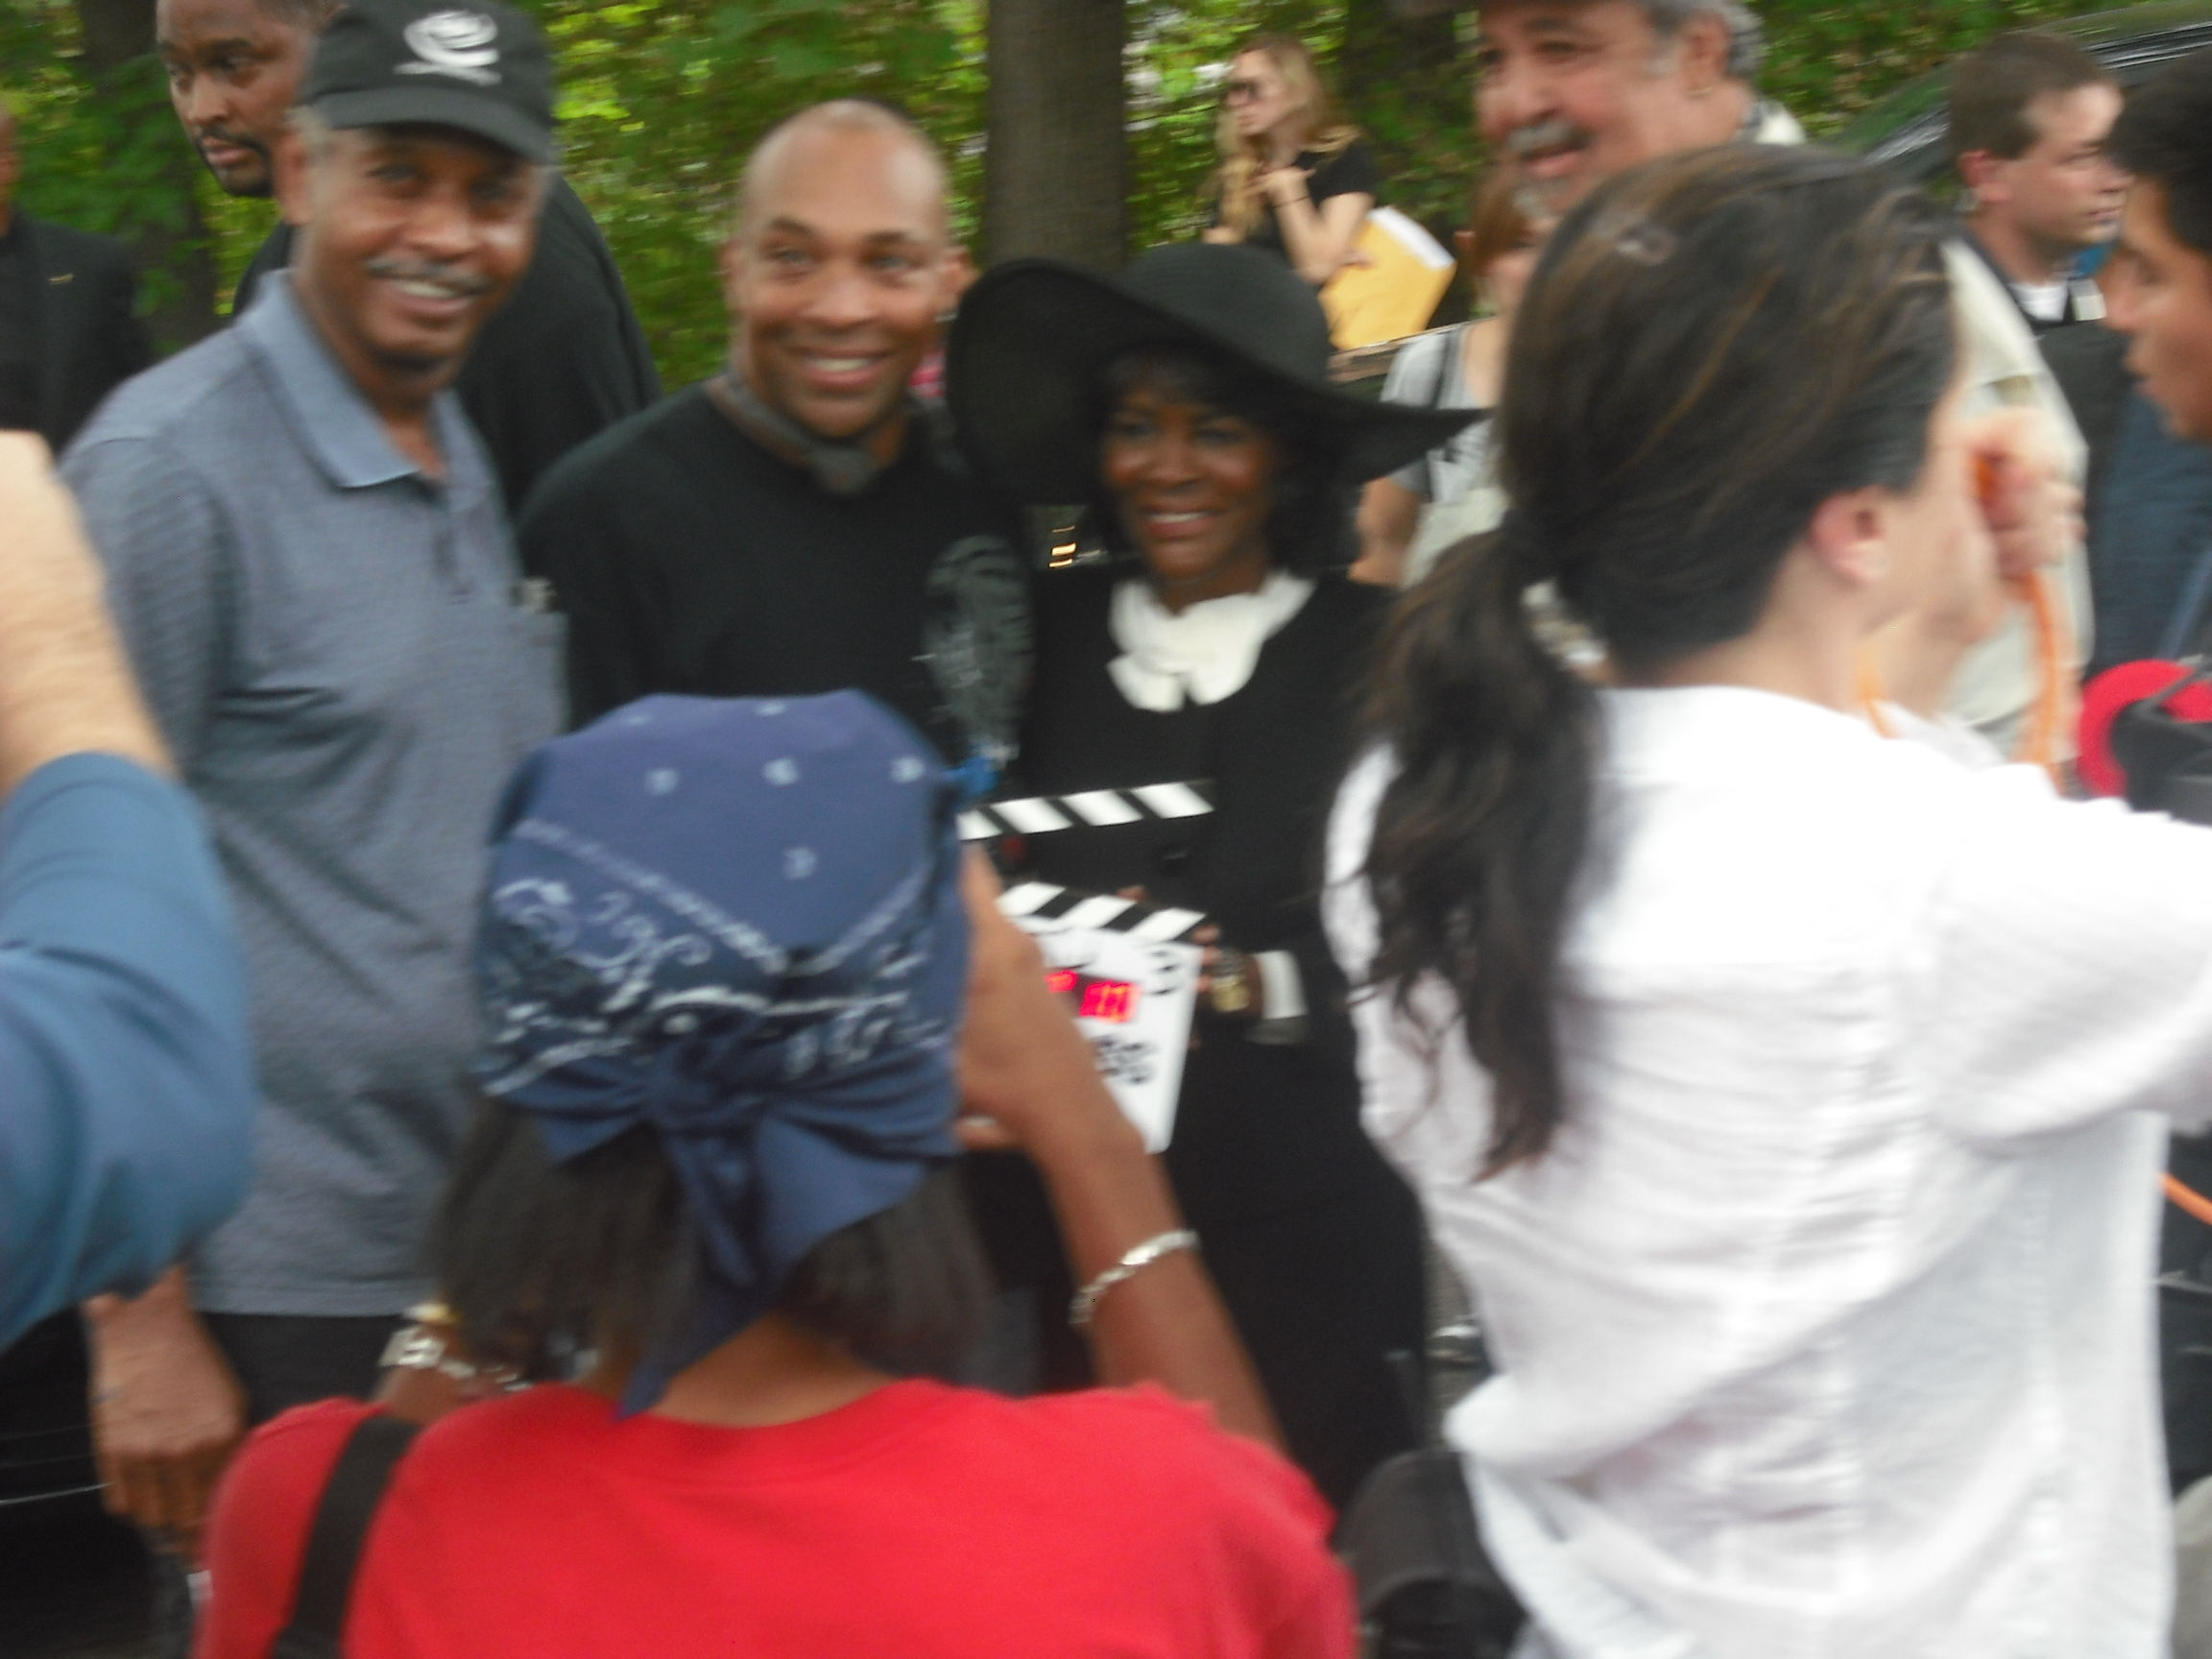 Last day of shooting for celebrated actress Cicely Tyson on set of Alex Cross.